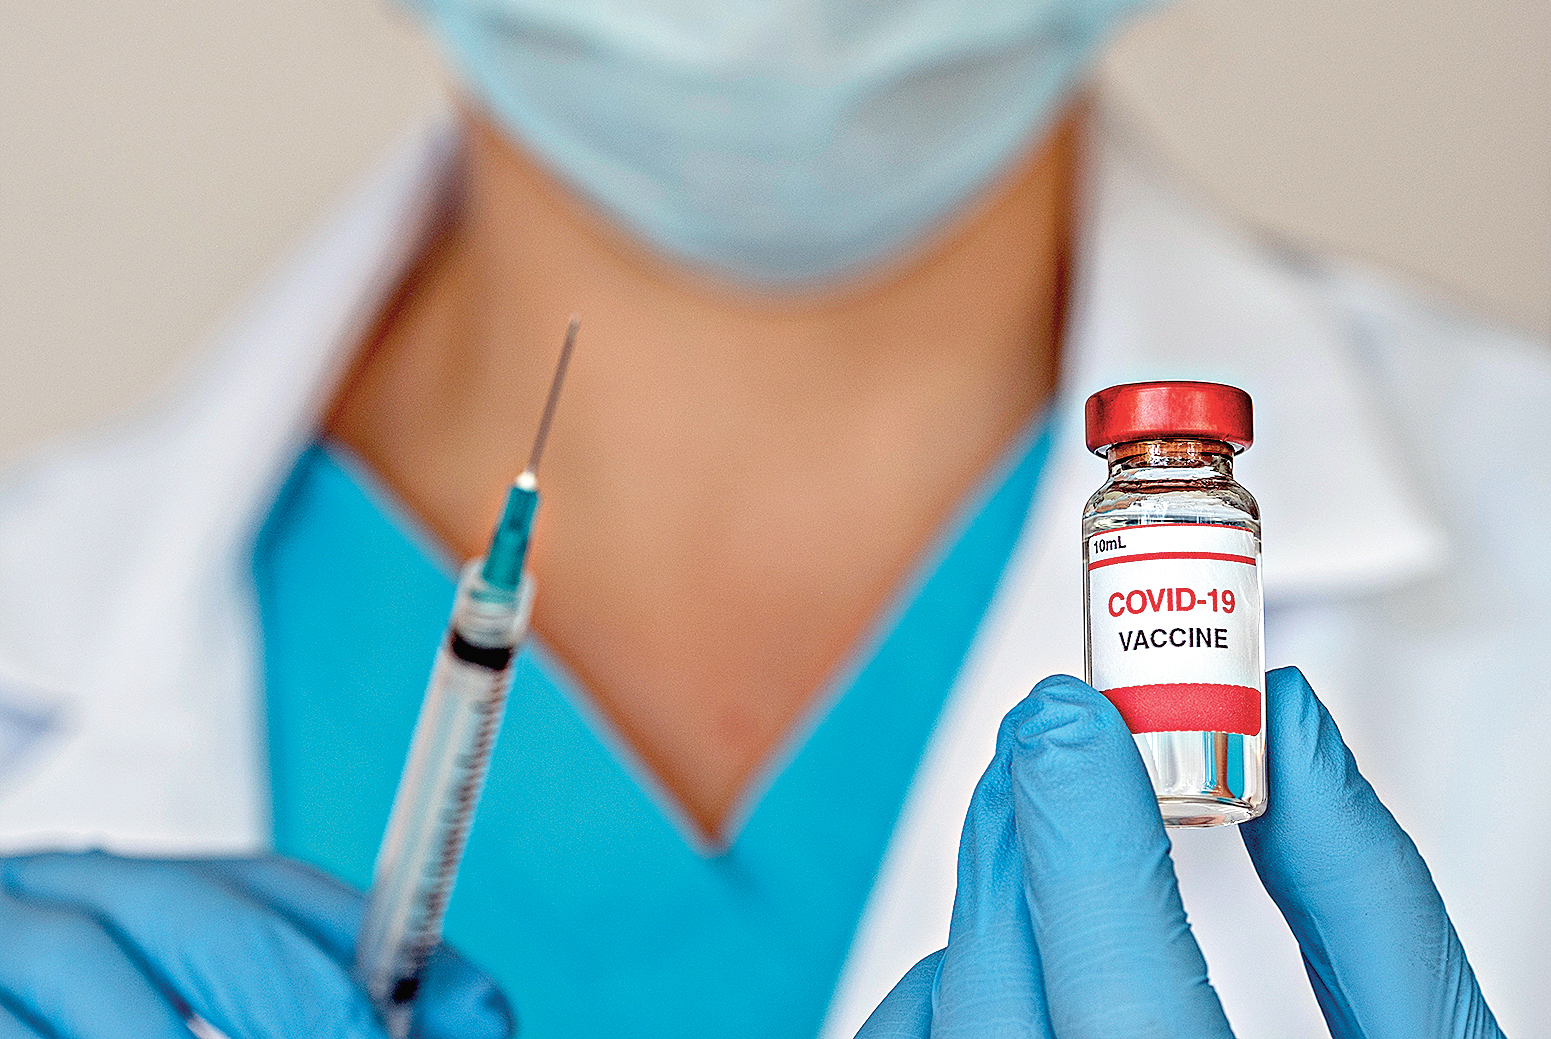 Close-up of doctors hands holding Covid-19 vaccine and syringe